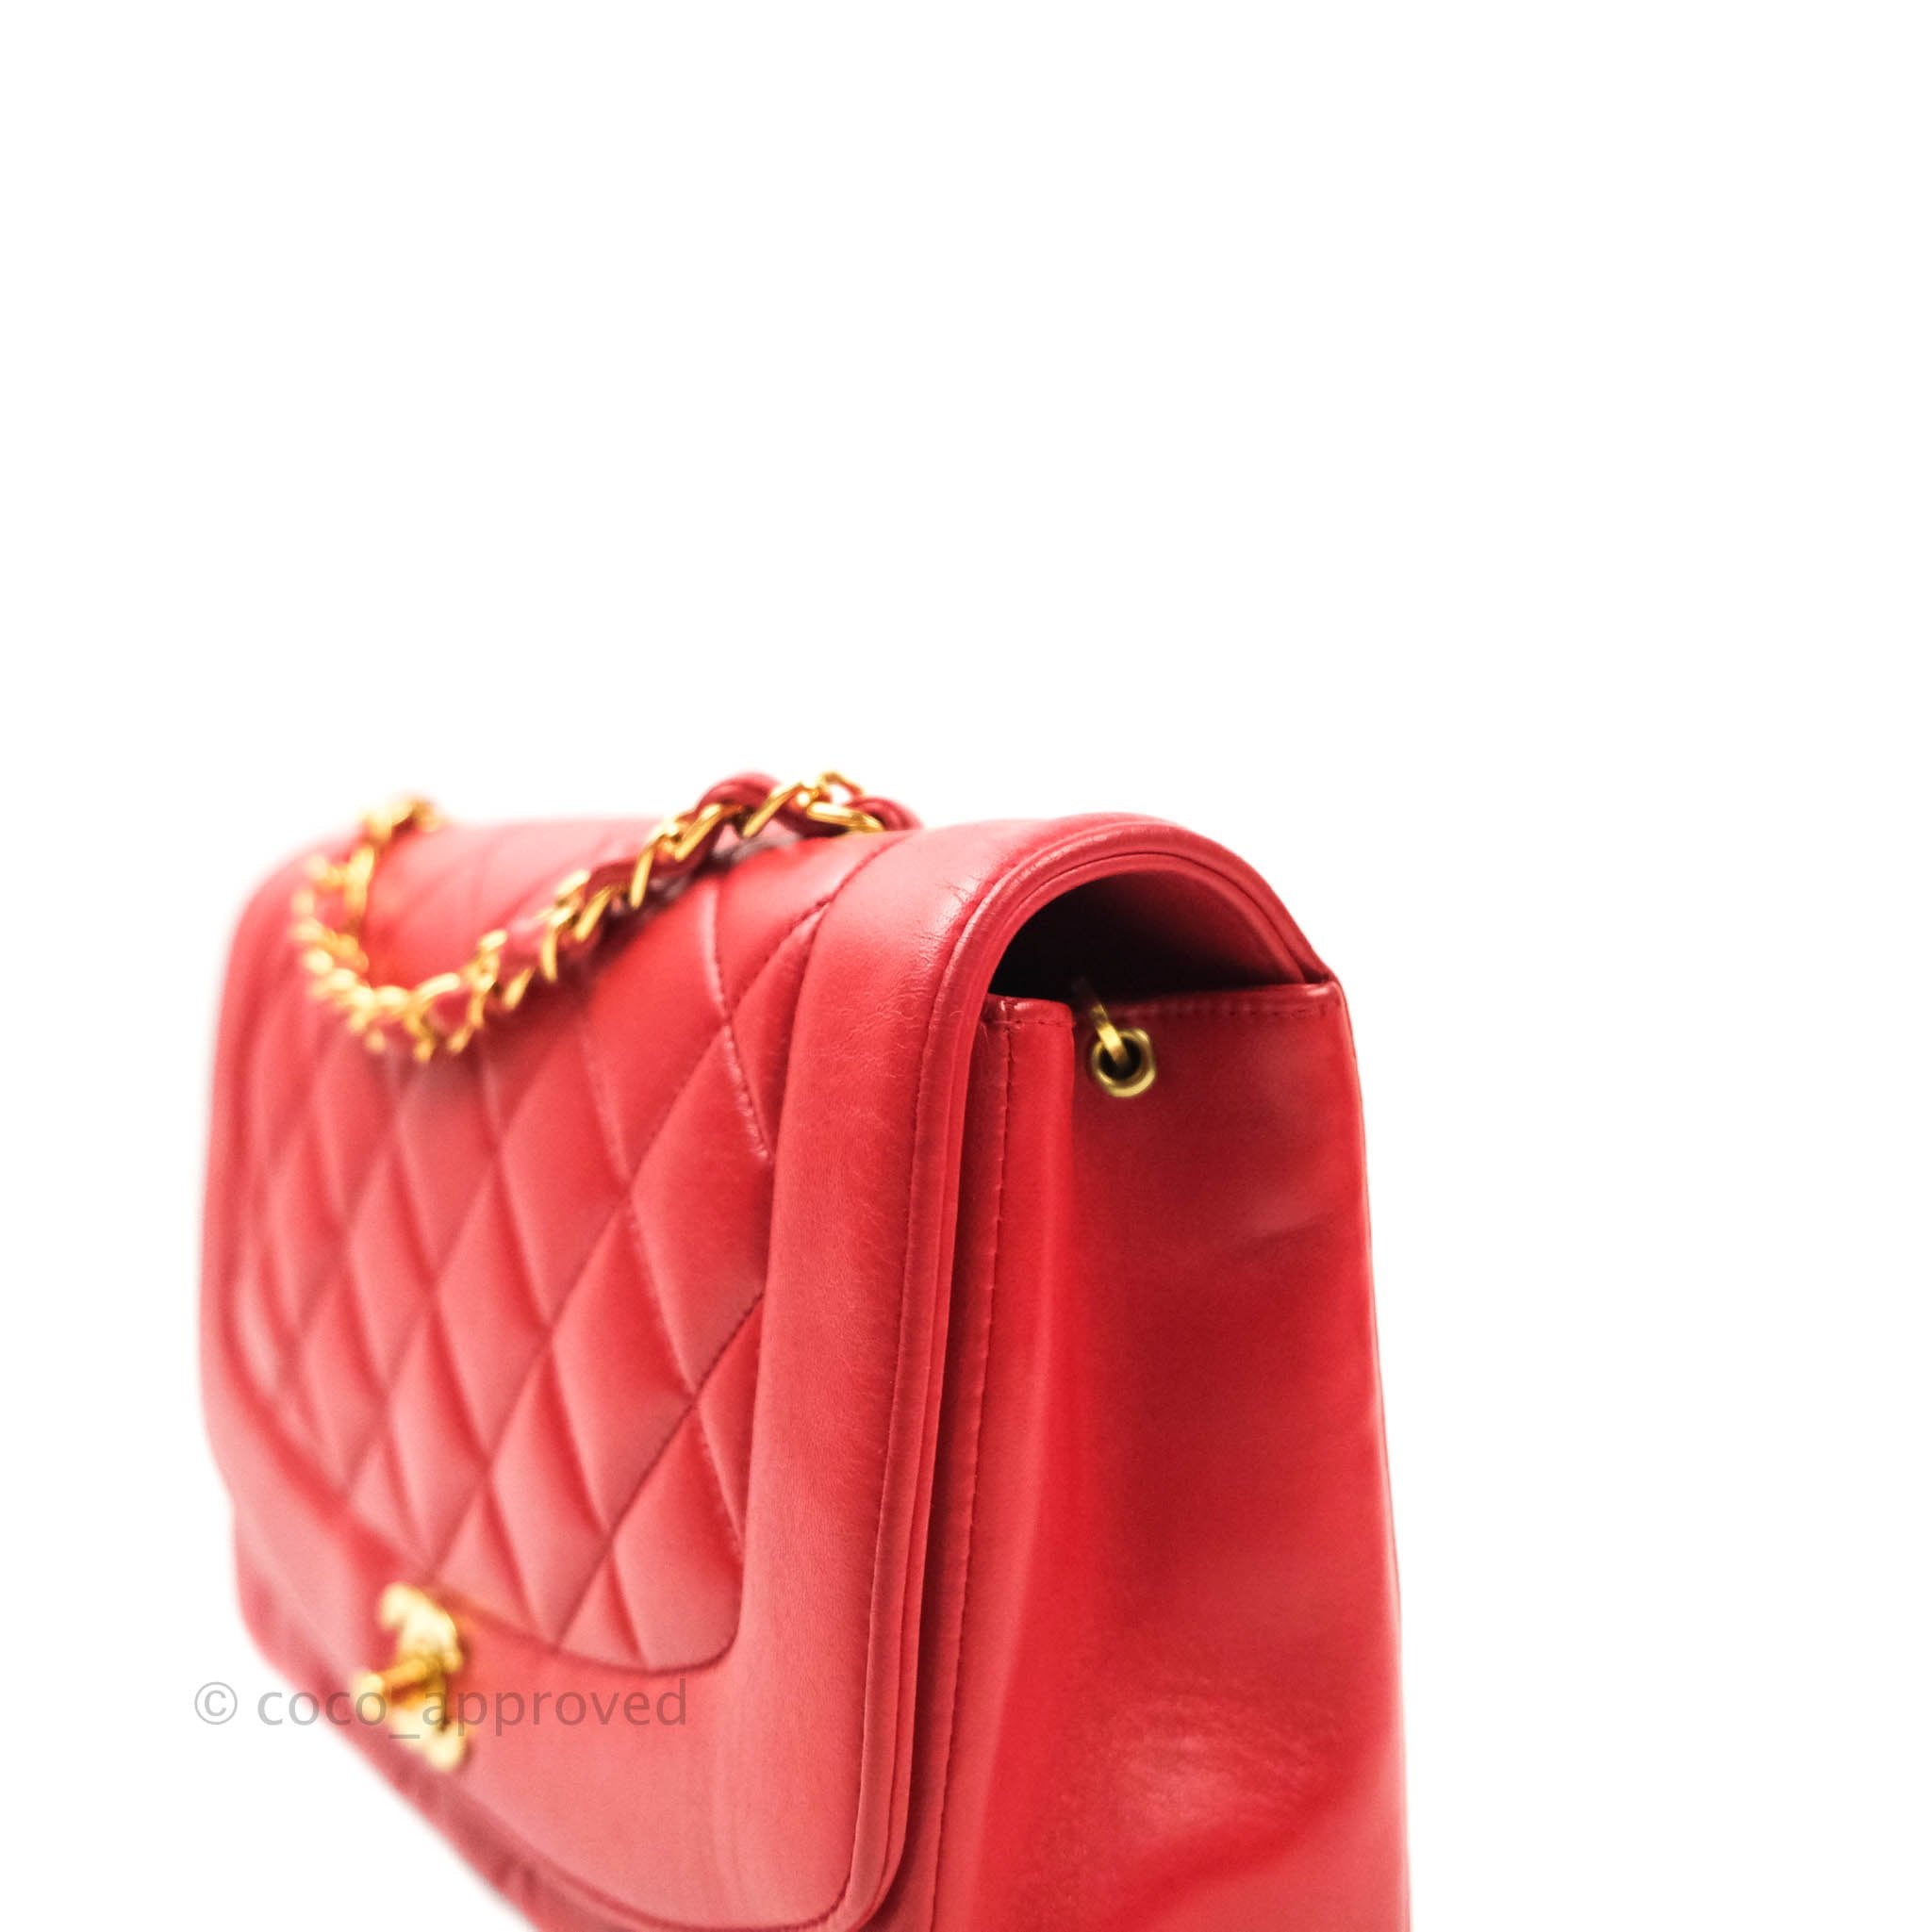 Chanel Red Quilted Lambskin Medium Vintage Classic Diana Flap Bag